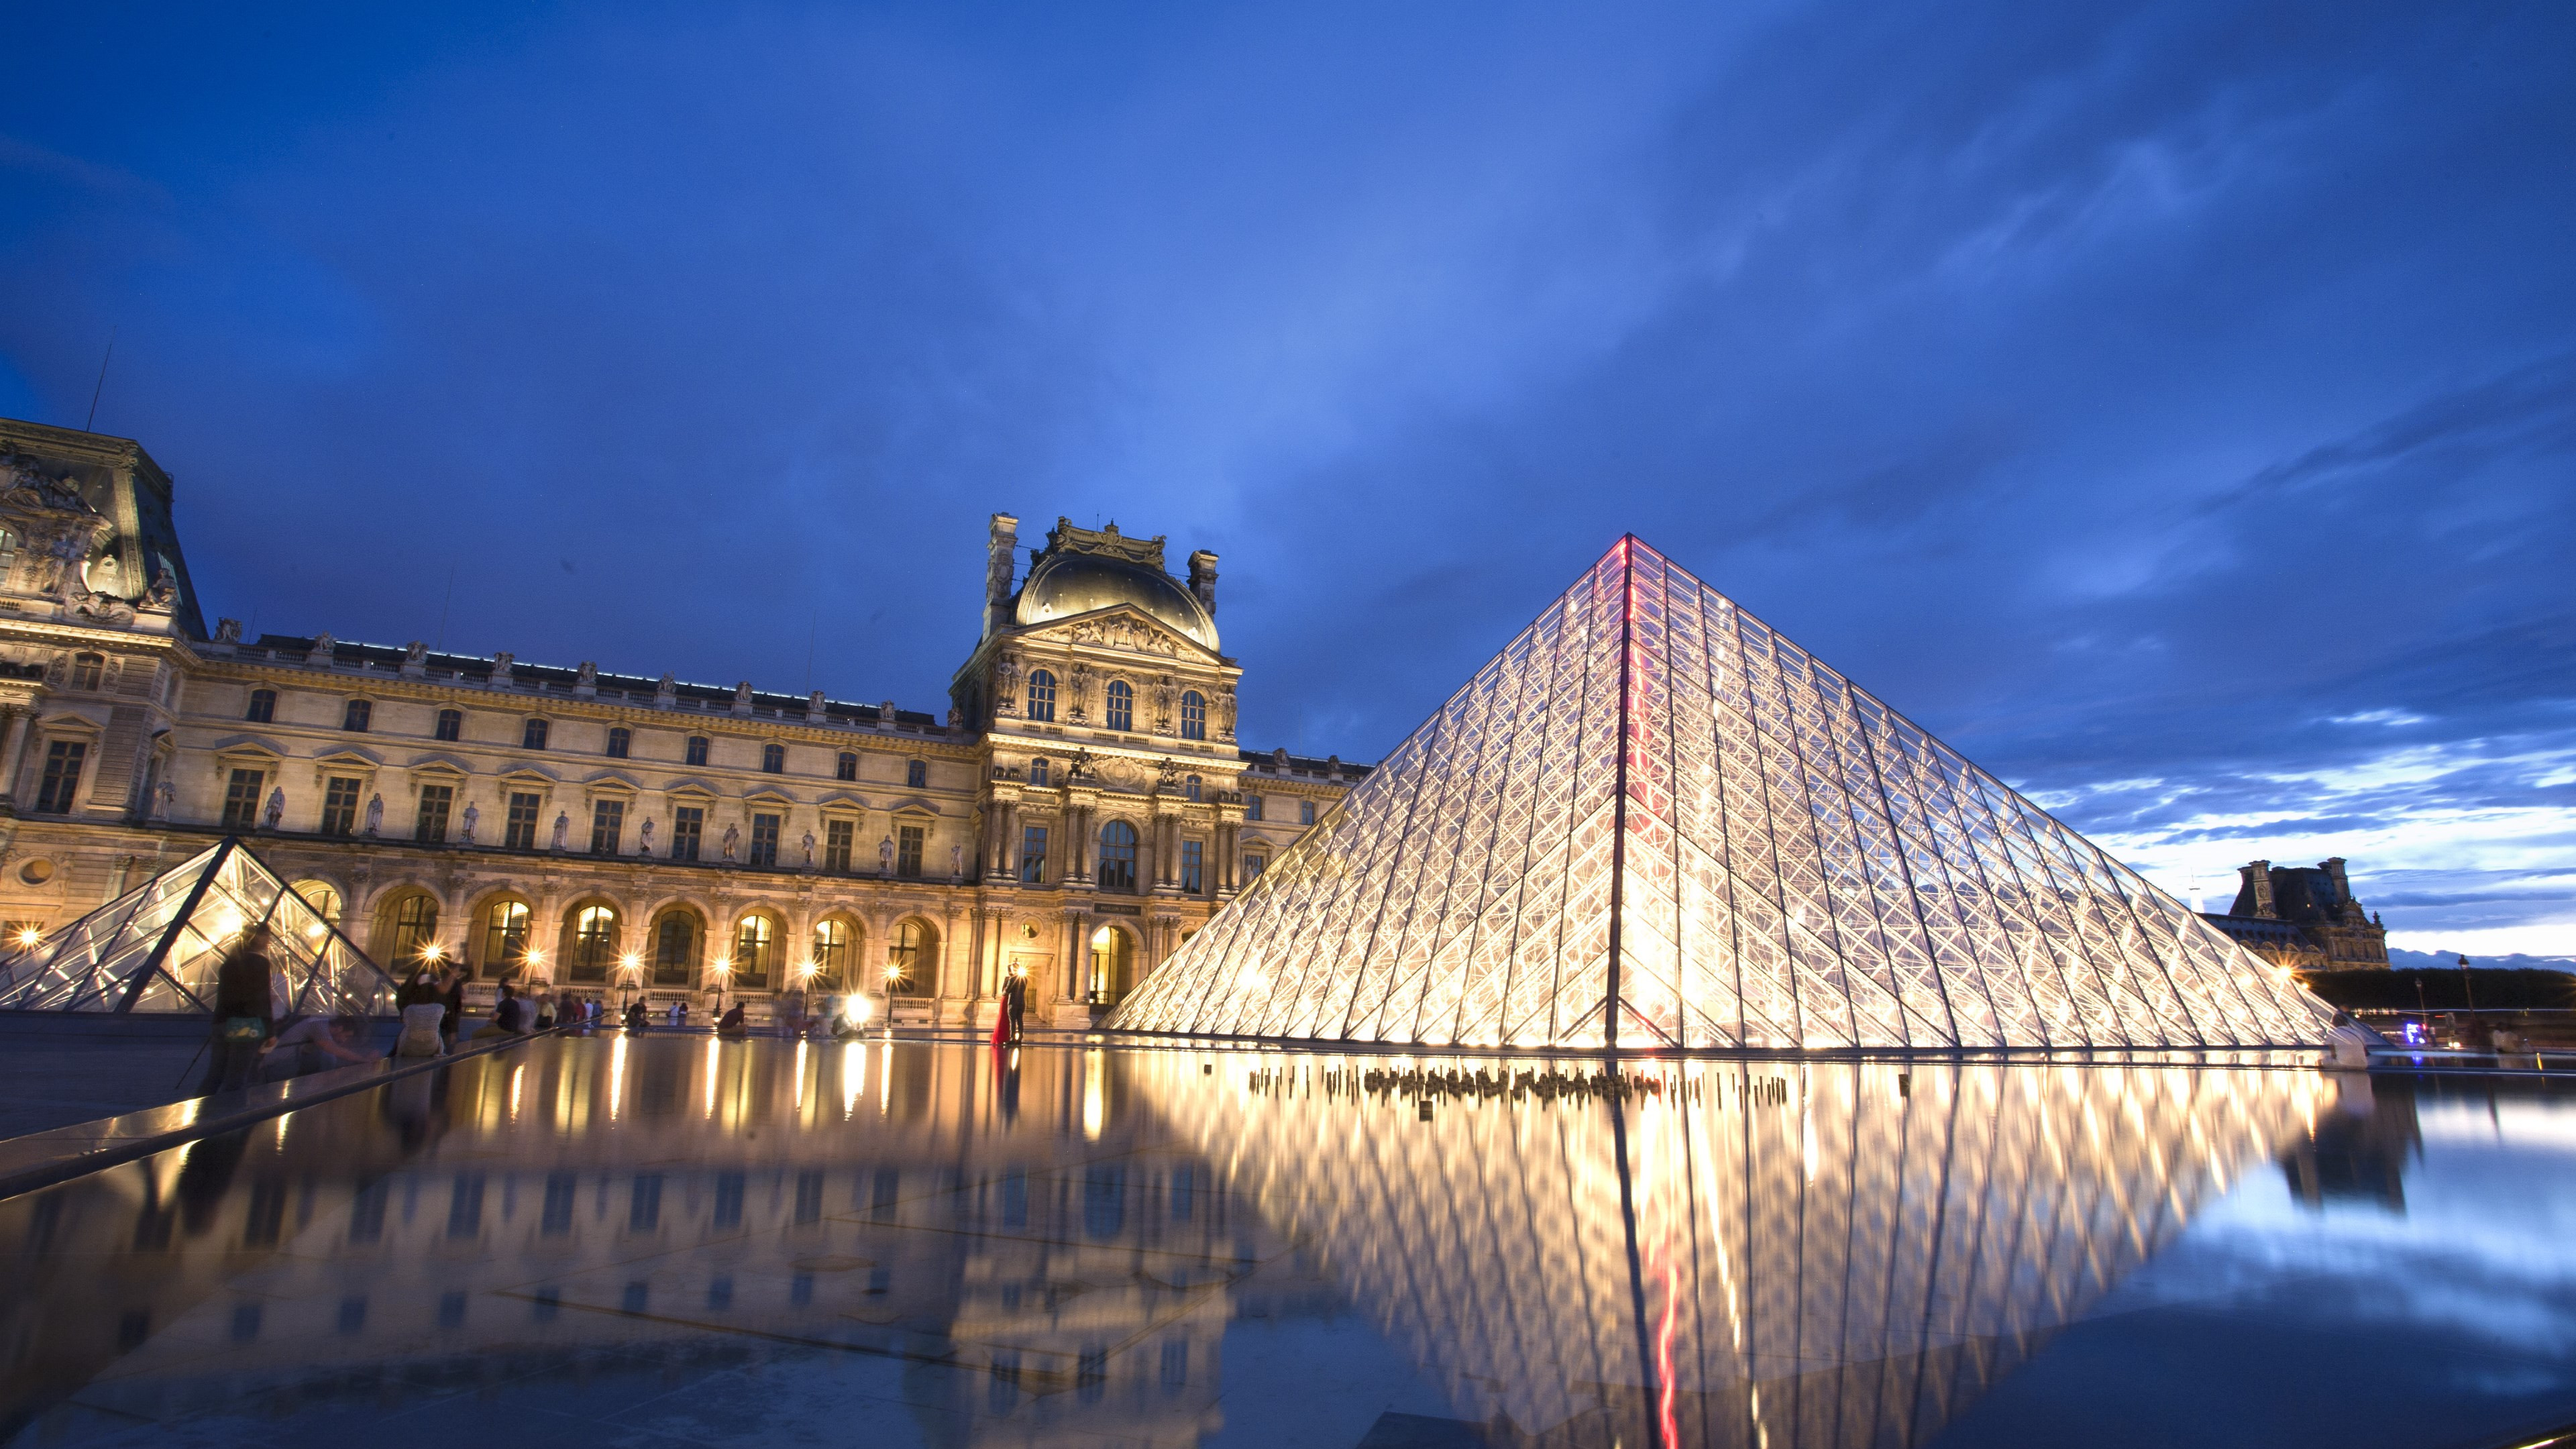 Louvre pyramid and museum wallpaper 3840x2160